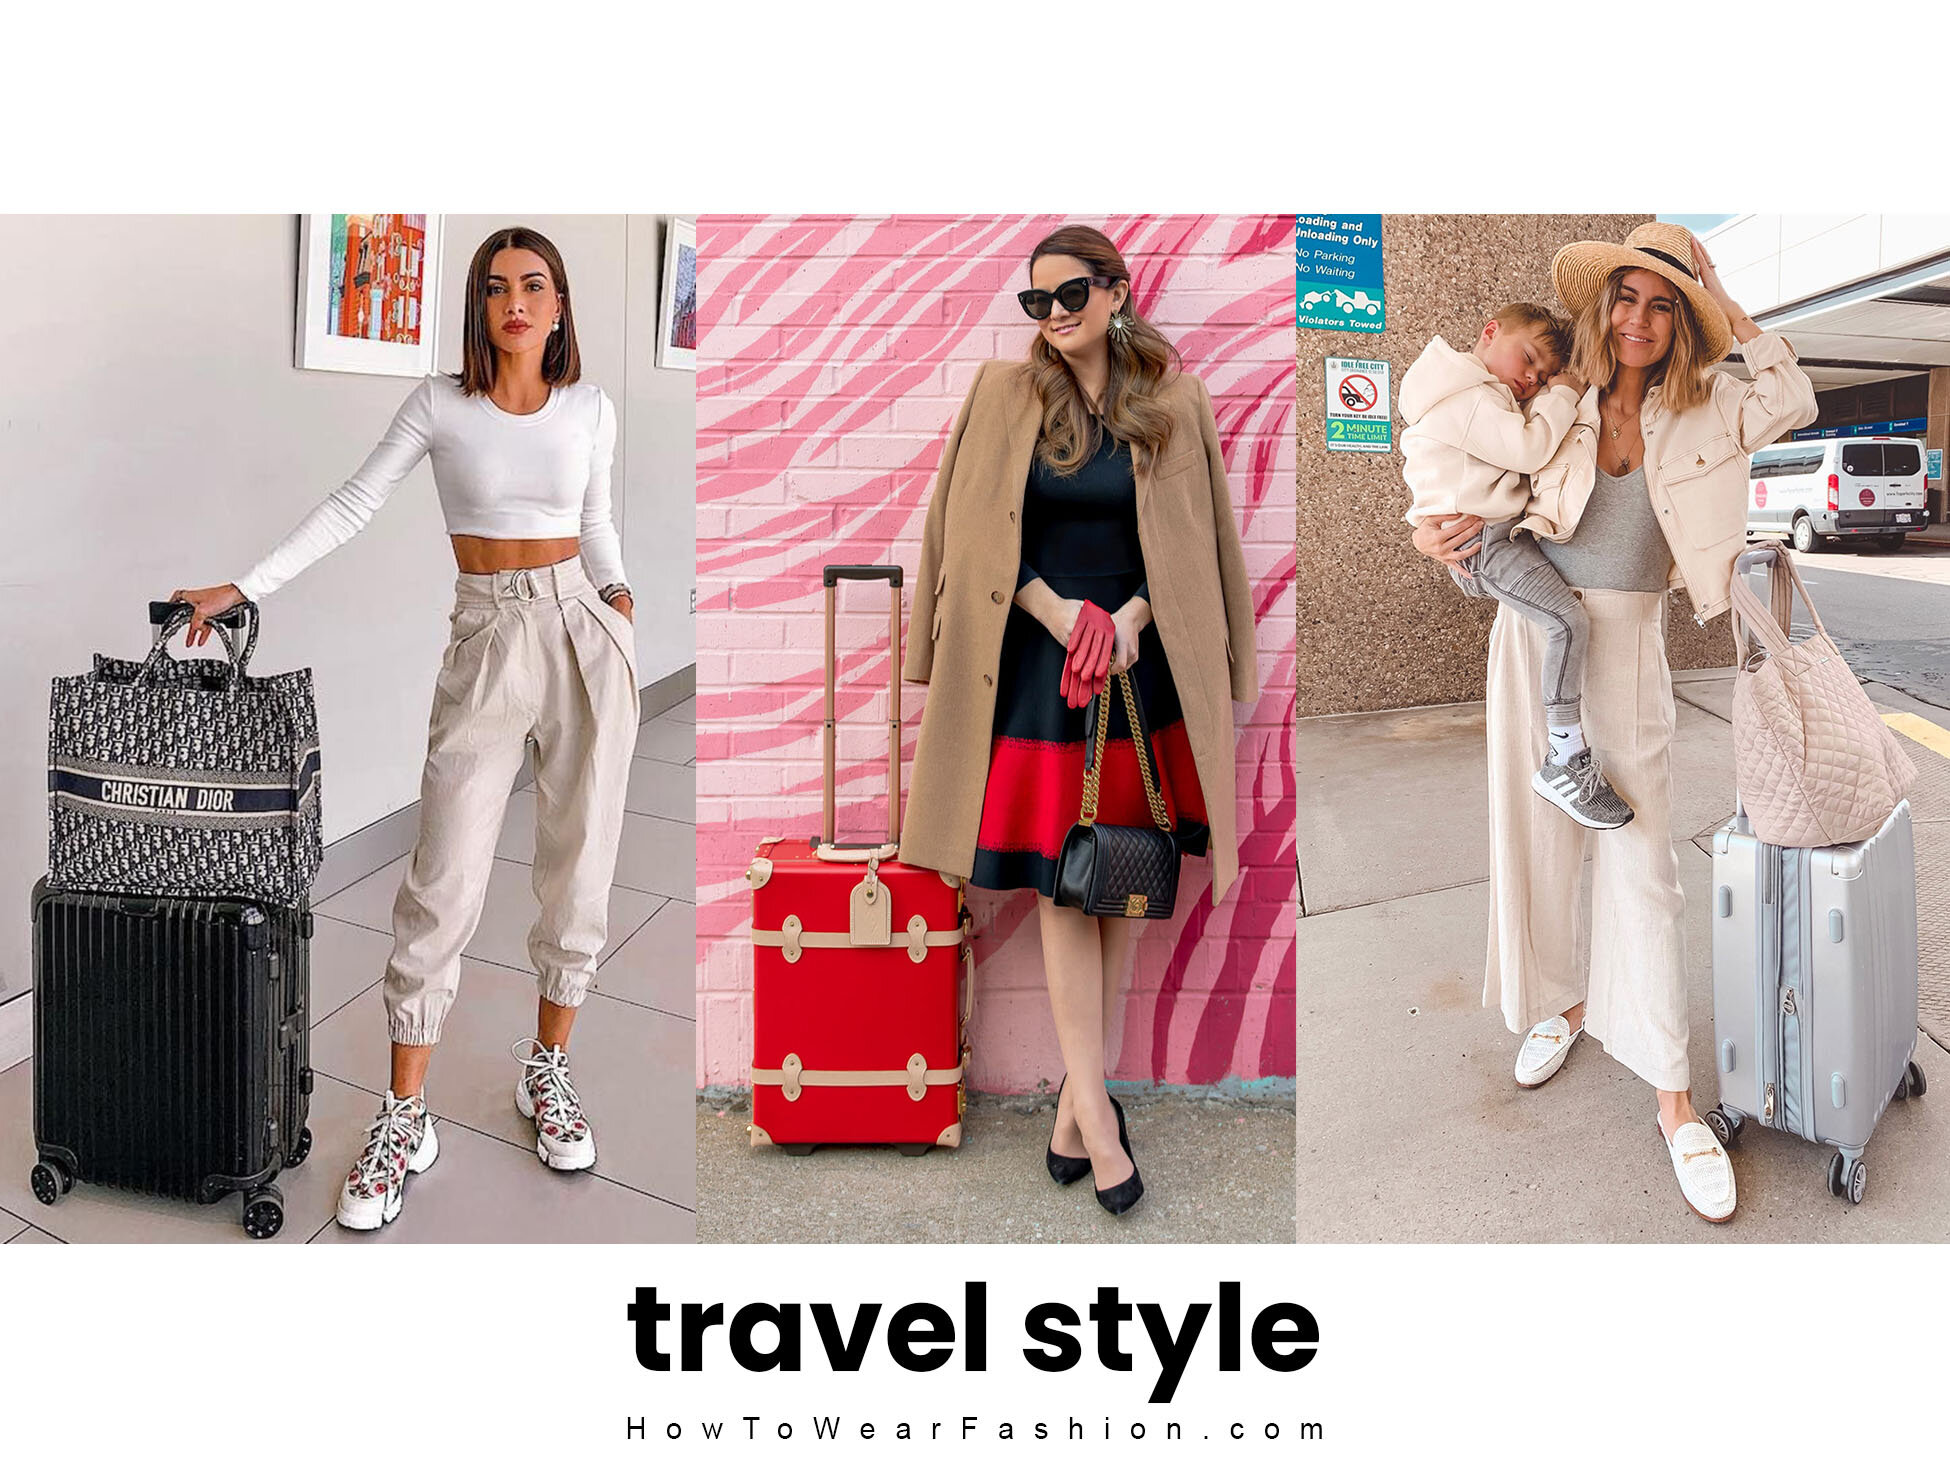 How to Travel with Style: Airport Travel and Bag Accessories ✈️🧳💼🎒  #travelbag #travelaccessories #carryon #luggage #luxurybag